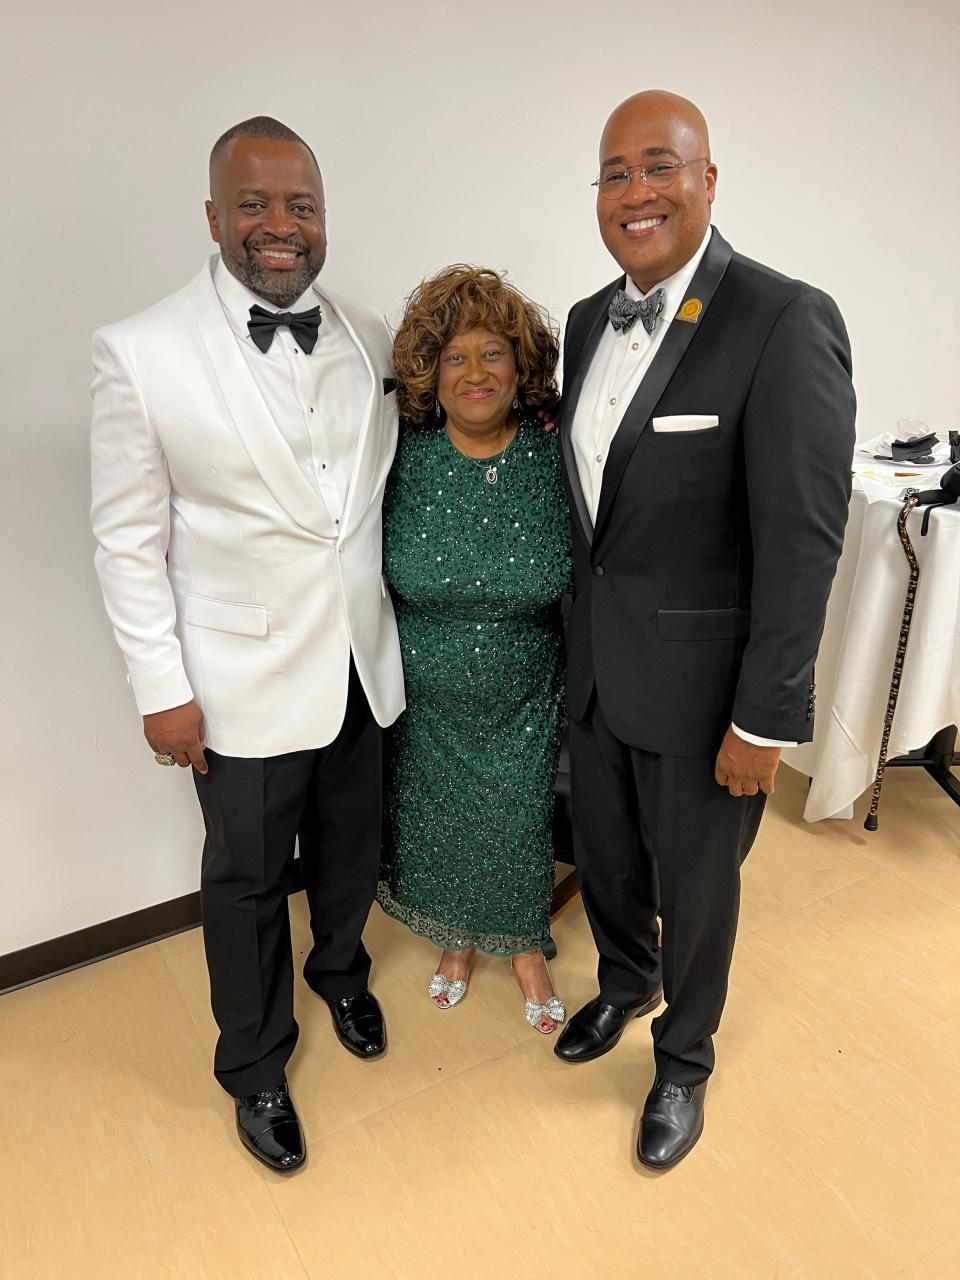 Former National Alumni Association President Gregory Clark (left), Distinguished Alumni Awards Committee Chair Doris Hicks (center) and NAA President Curtis Johnson, Jr. (right) take a photo during the 2022 NAA Convention held in Tallahassee in June.